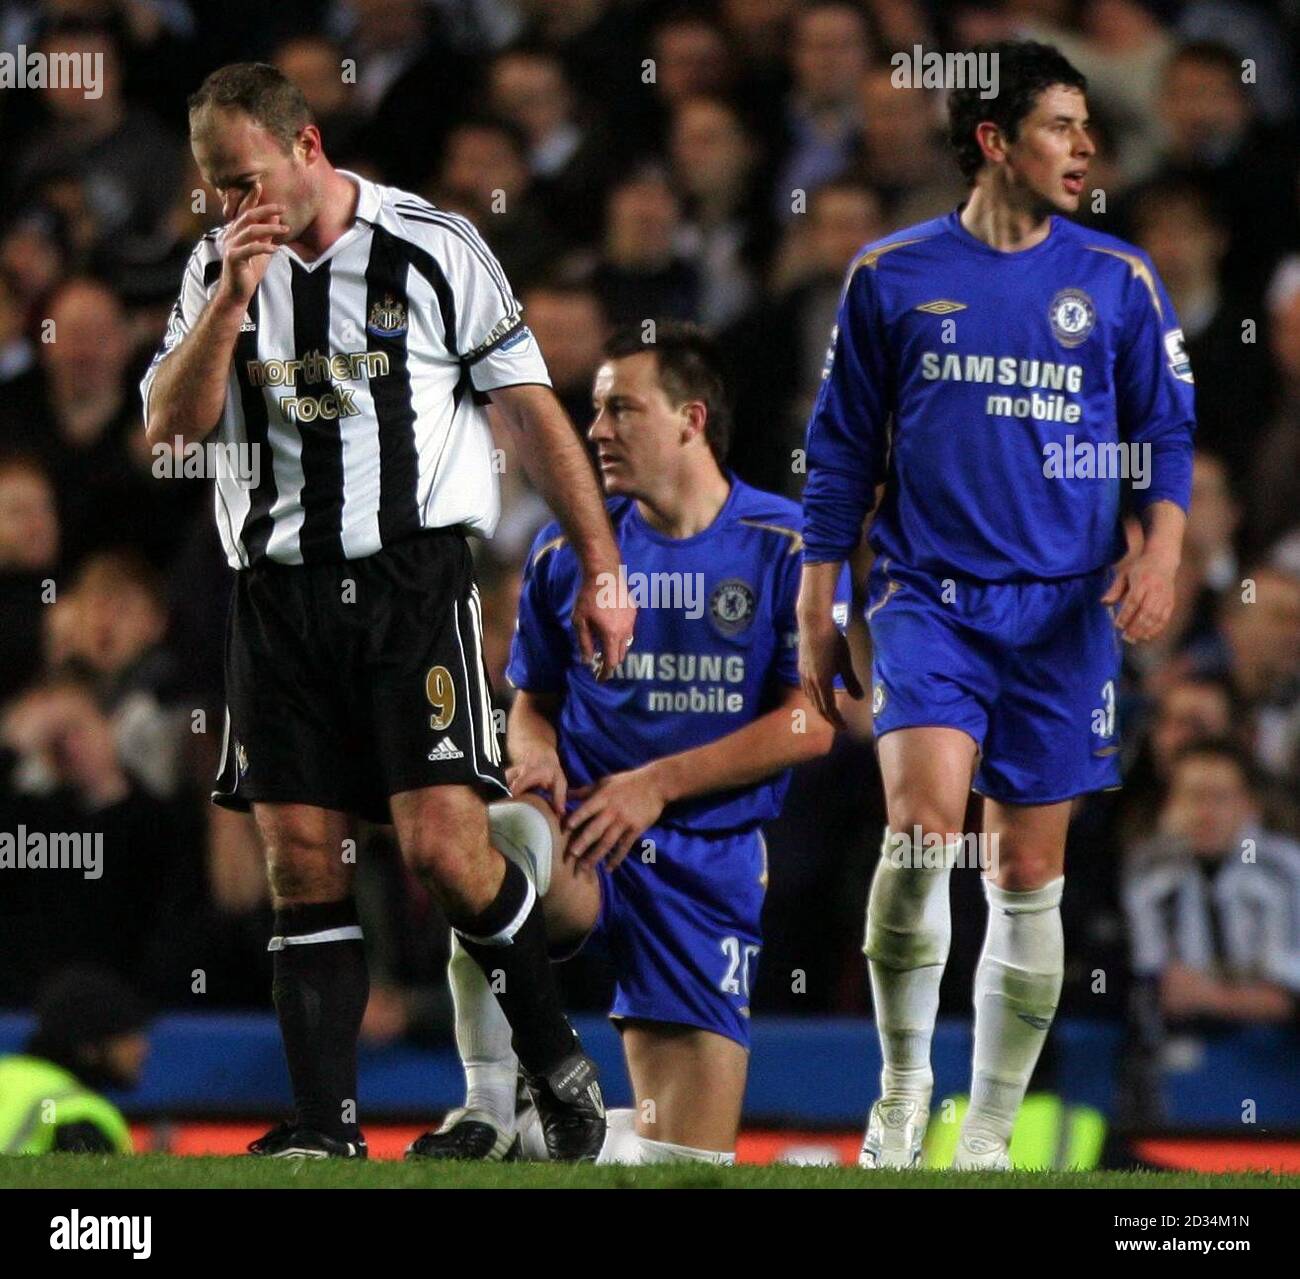 Newcastle United captain Alan Shearer (L) shows his dejection after Chelsea captain John Terry (C) stops another attack during during the FA Cup sixth round match at Stamford Bridge, London, Wednesday March 22, 2006. PRESS ASSOCIATION Photo. Photo credit should read: Nick Potts/PA. Stock Photo